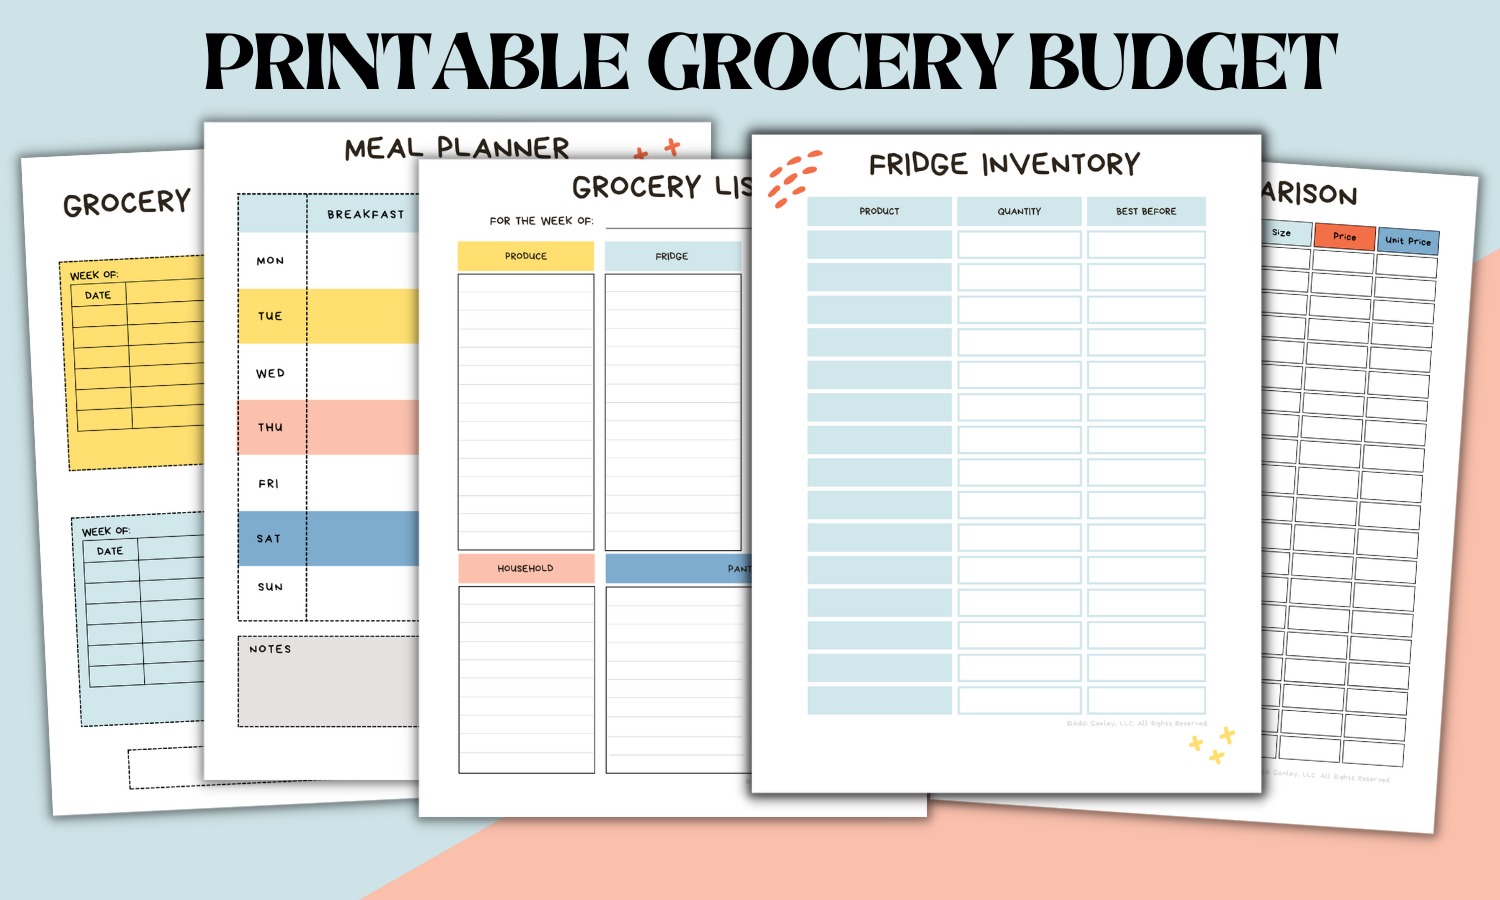 A Printable Grocery Budget Template - Download Now